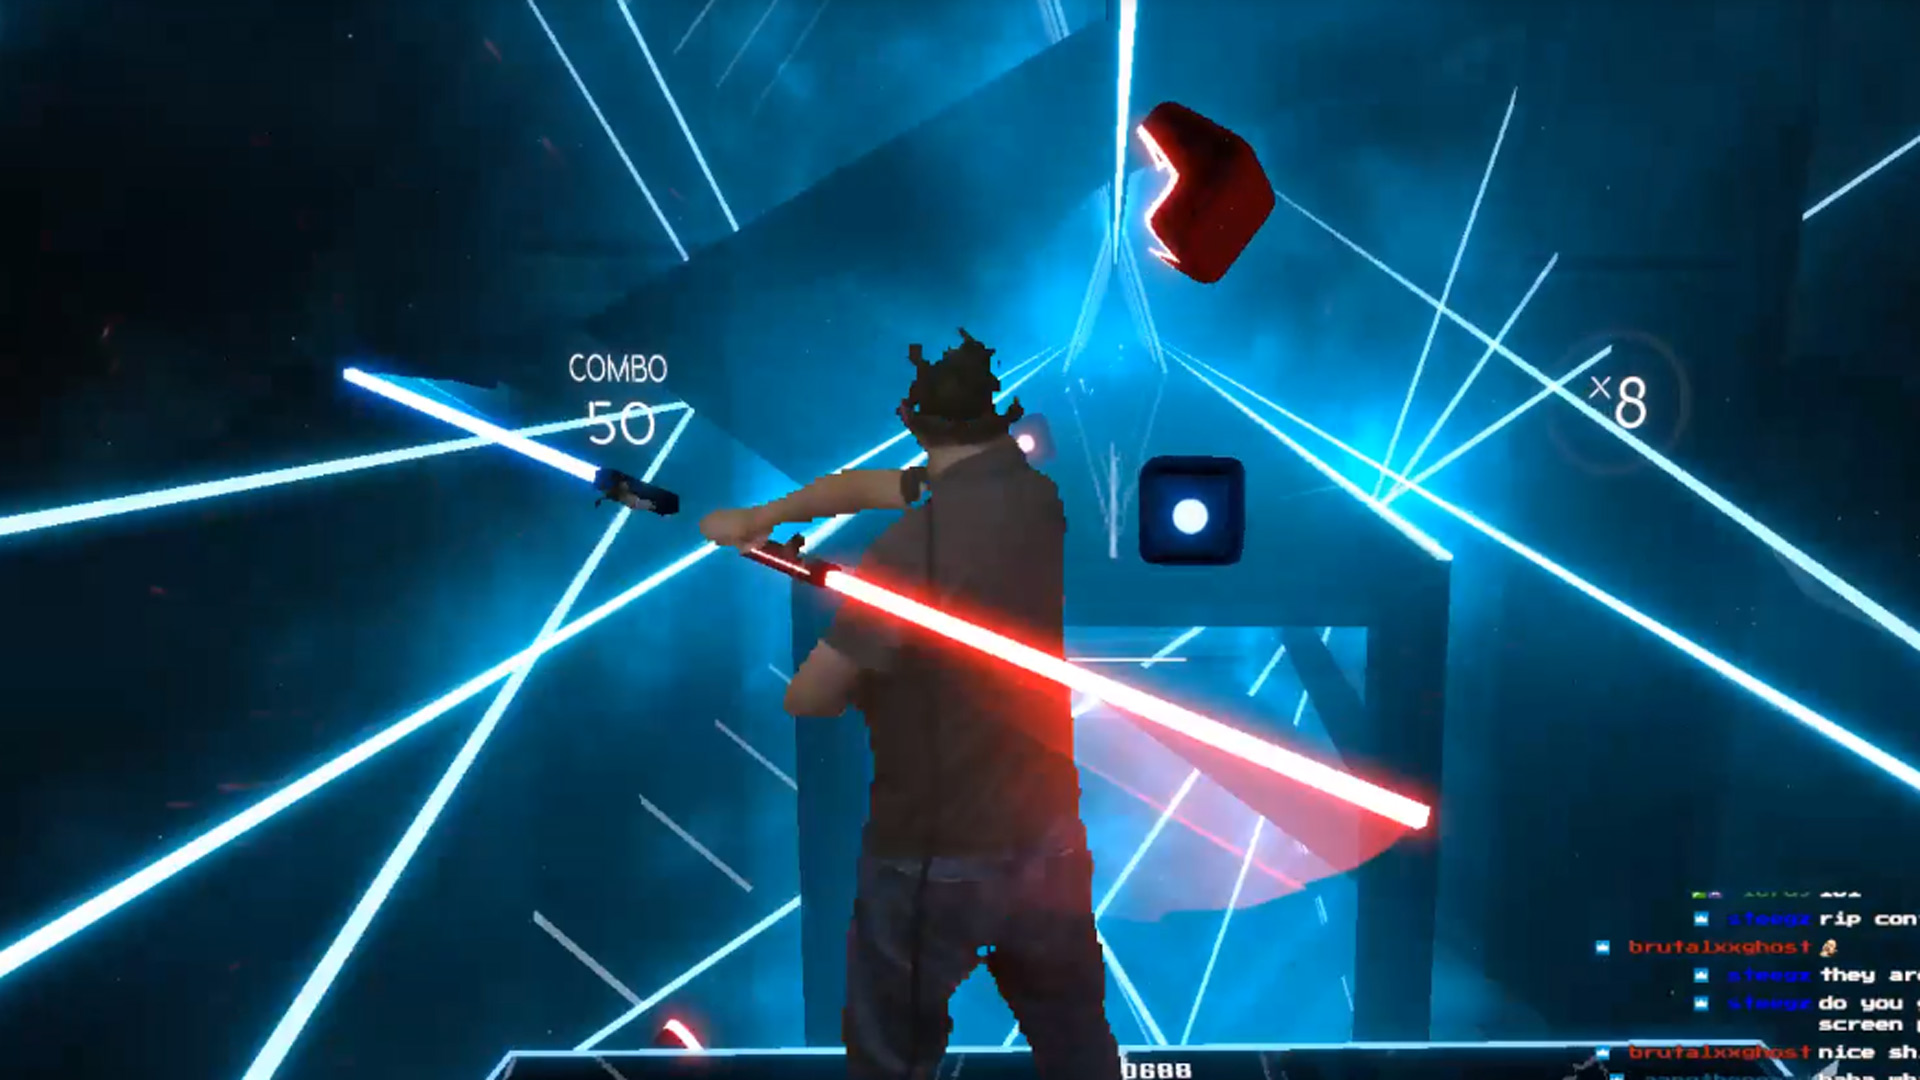 This Guy Modded Oculus Touch To Play Beat Saber Darth Maul Style